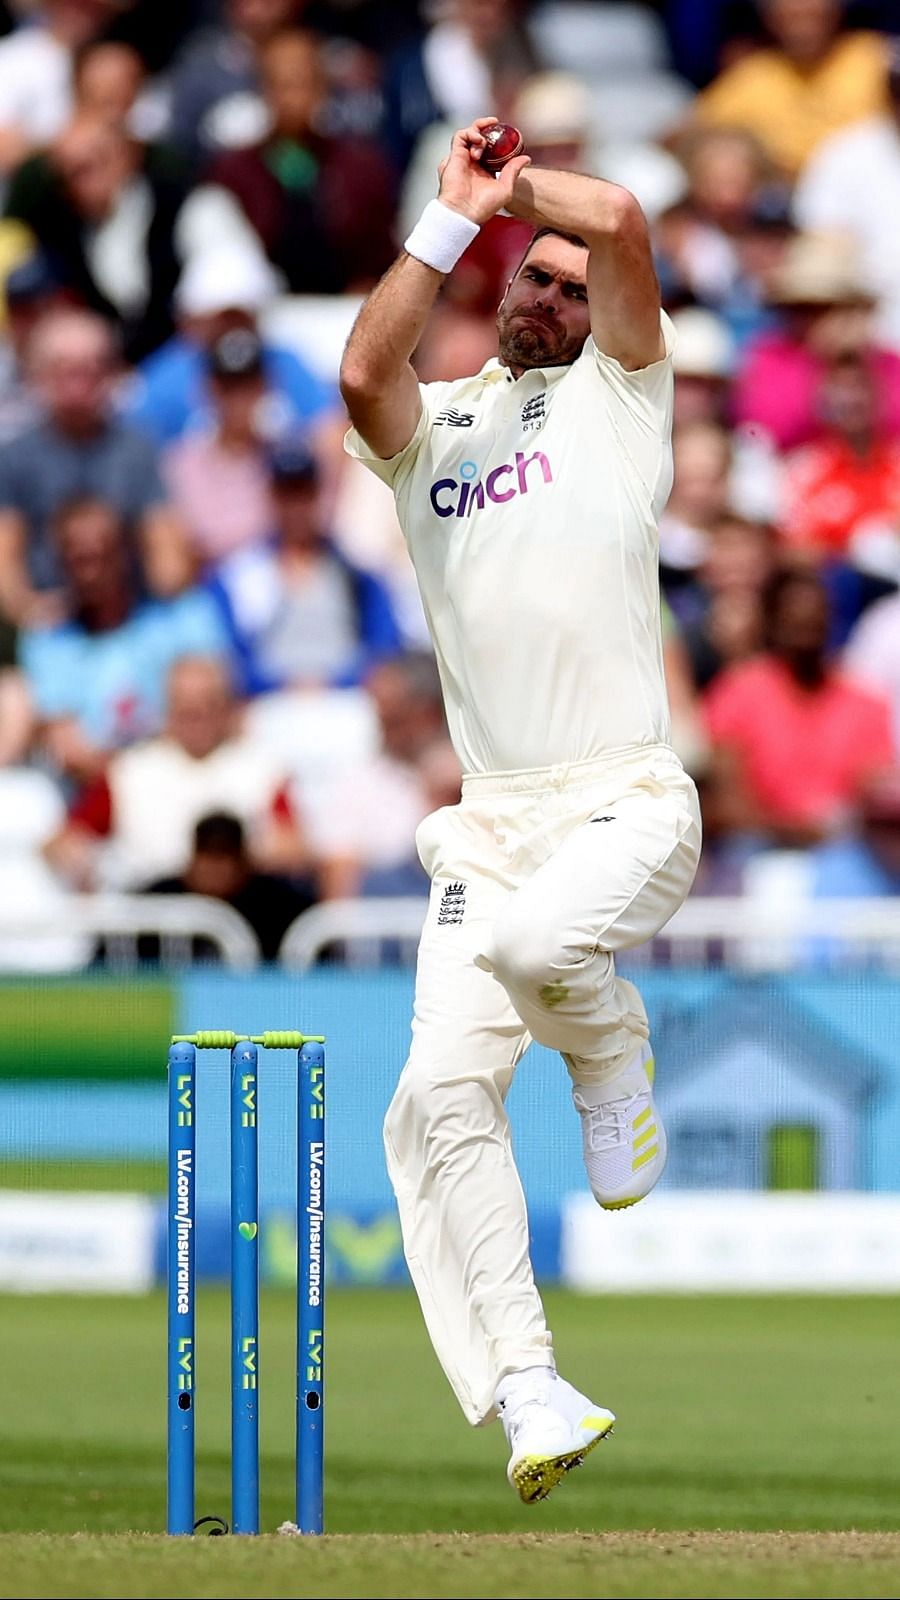 IND Vs ENG 2021: James Anderson Surpasses Anil Kumble To Become The Third Highest Wicket Taker In Tests